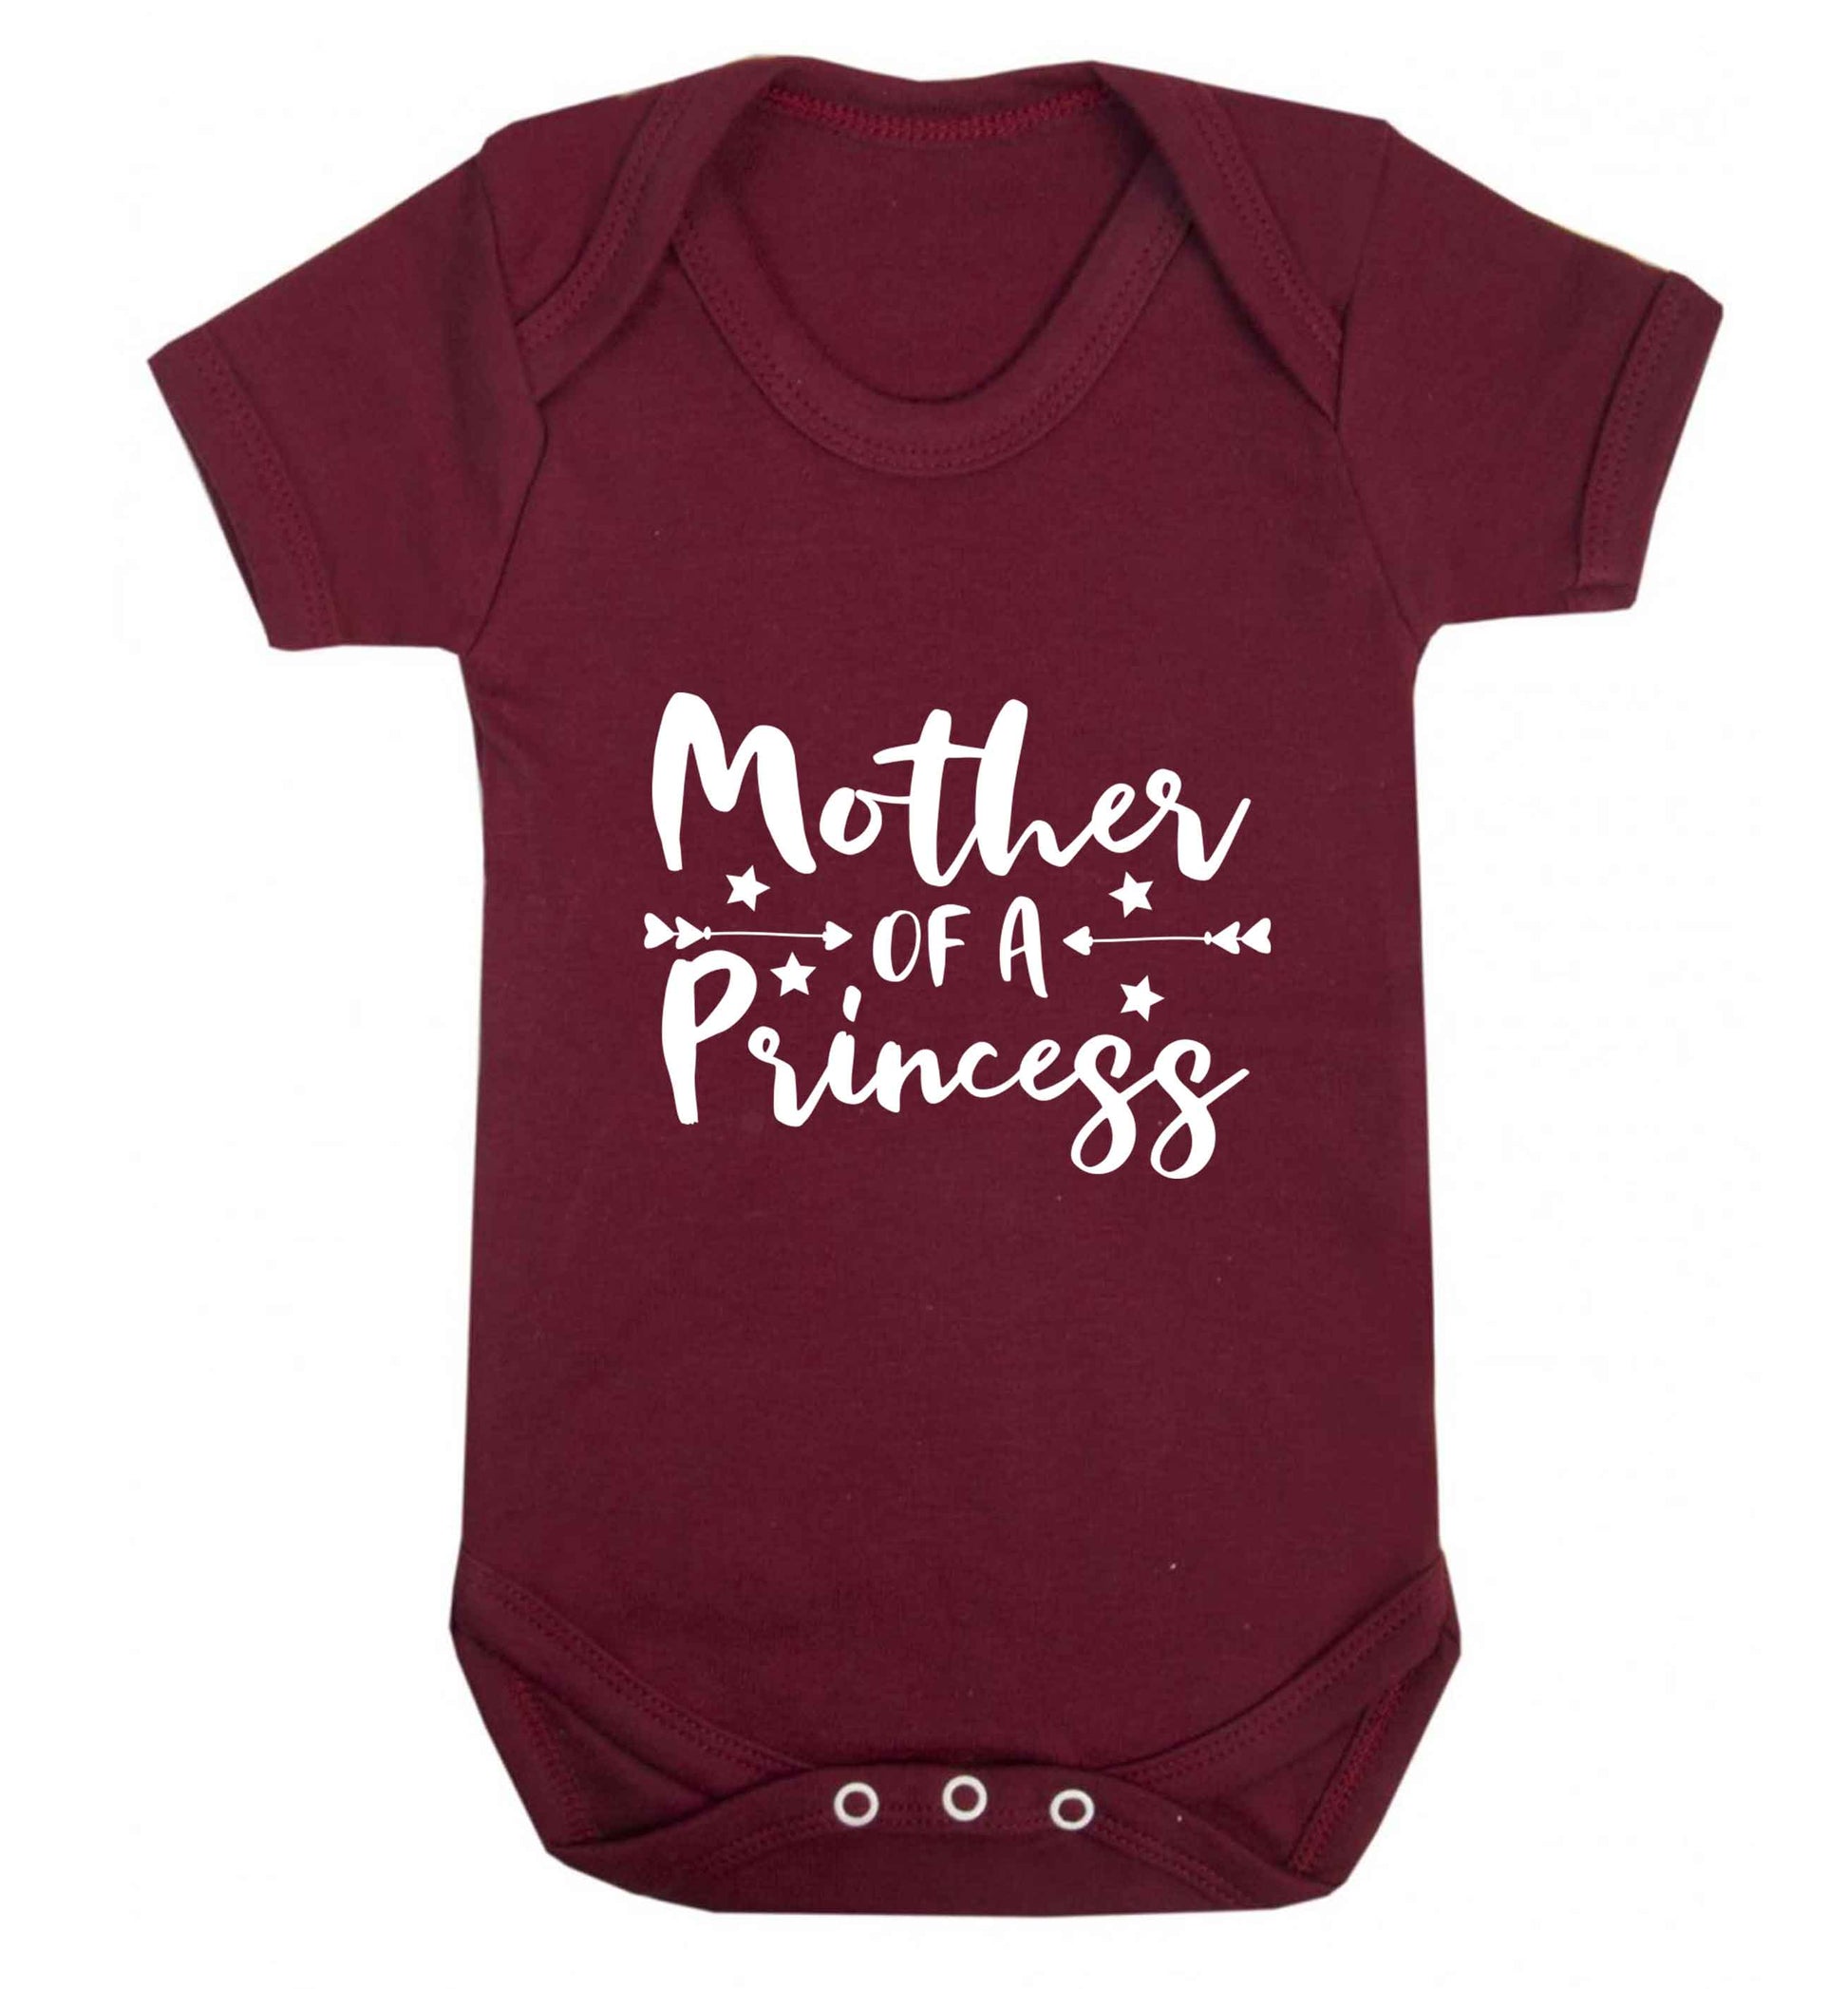 Mother of a princess baby vest maroon 18-24 months